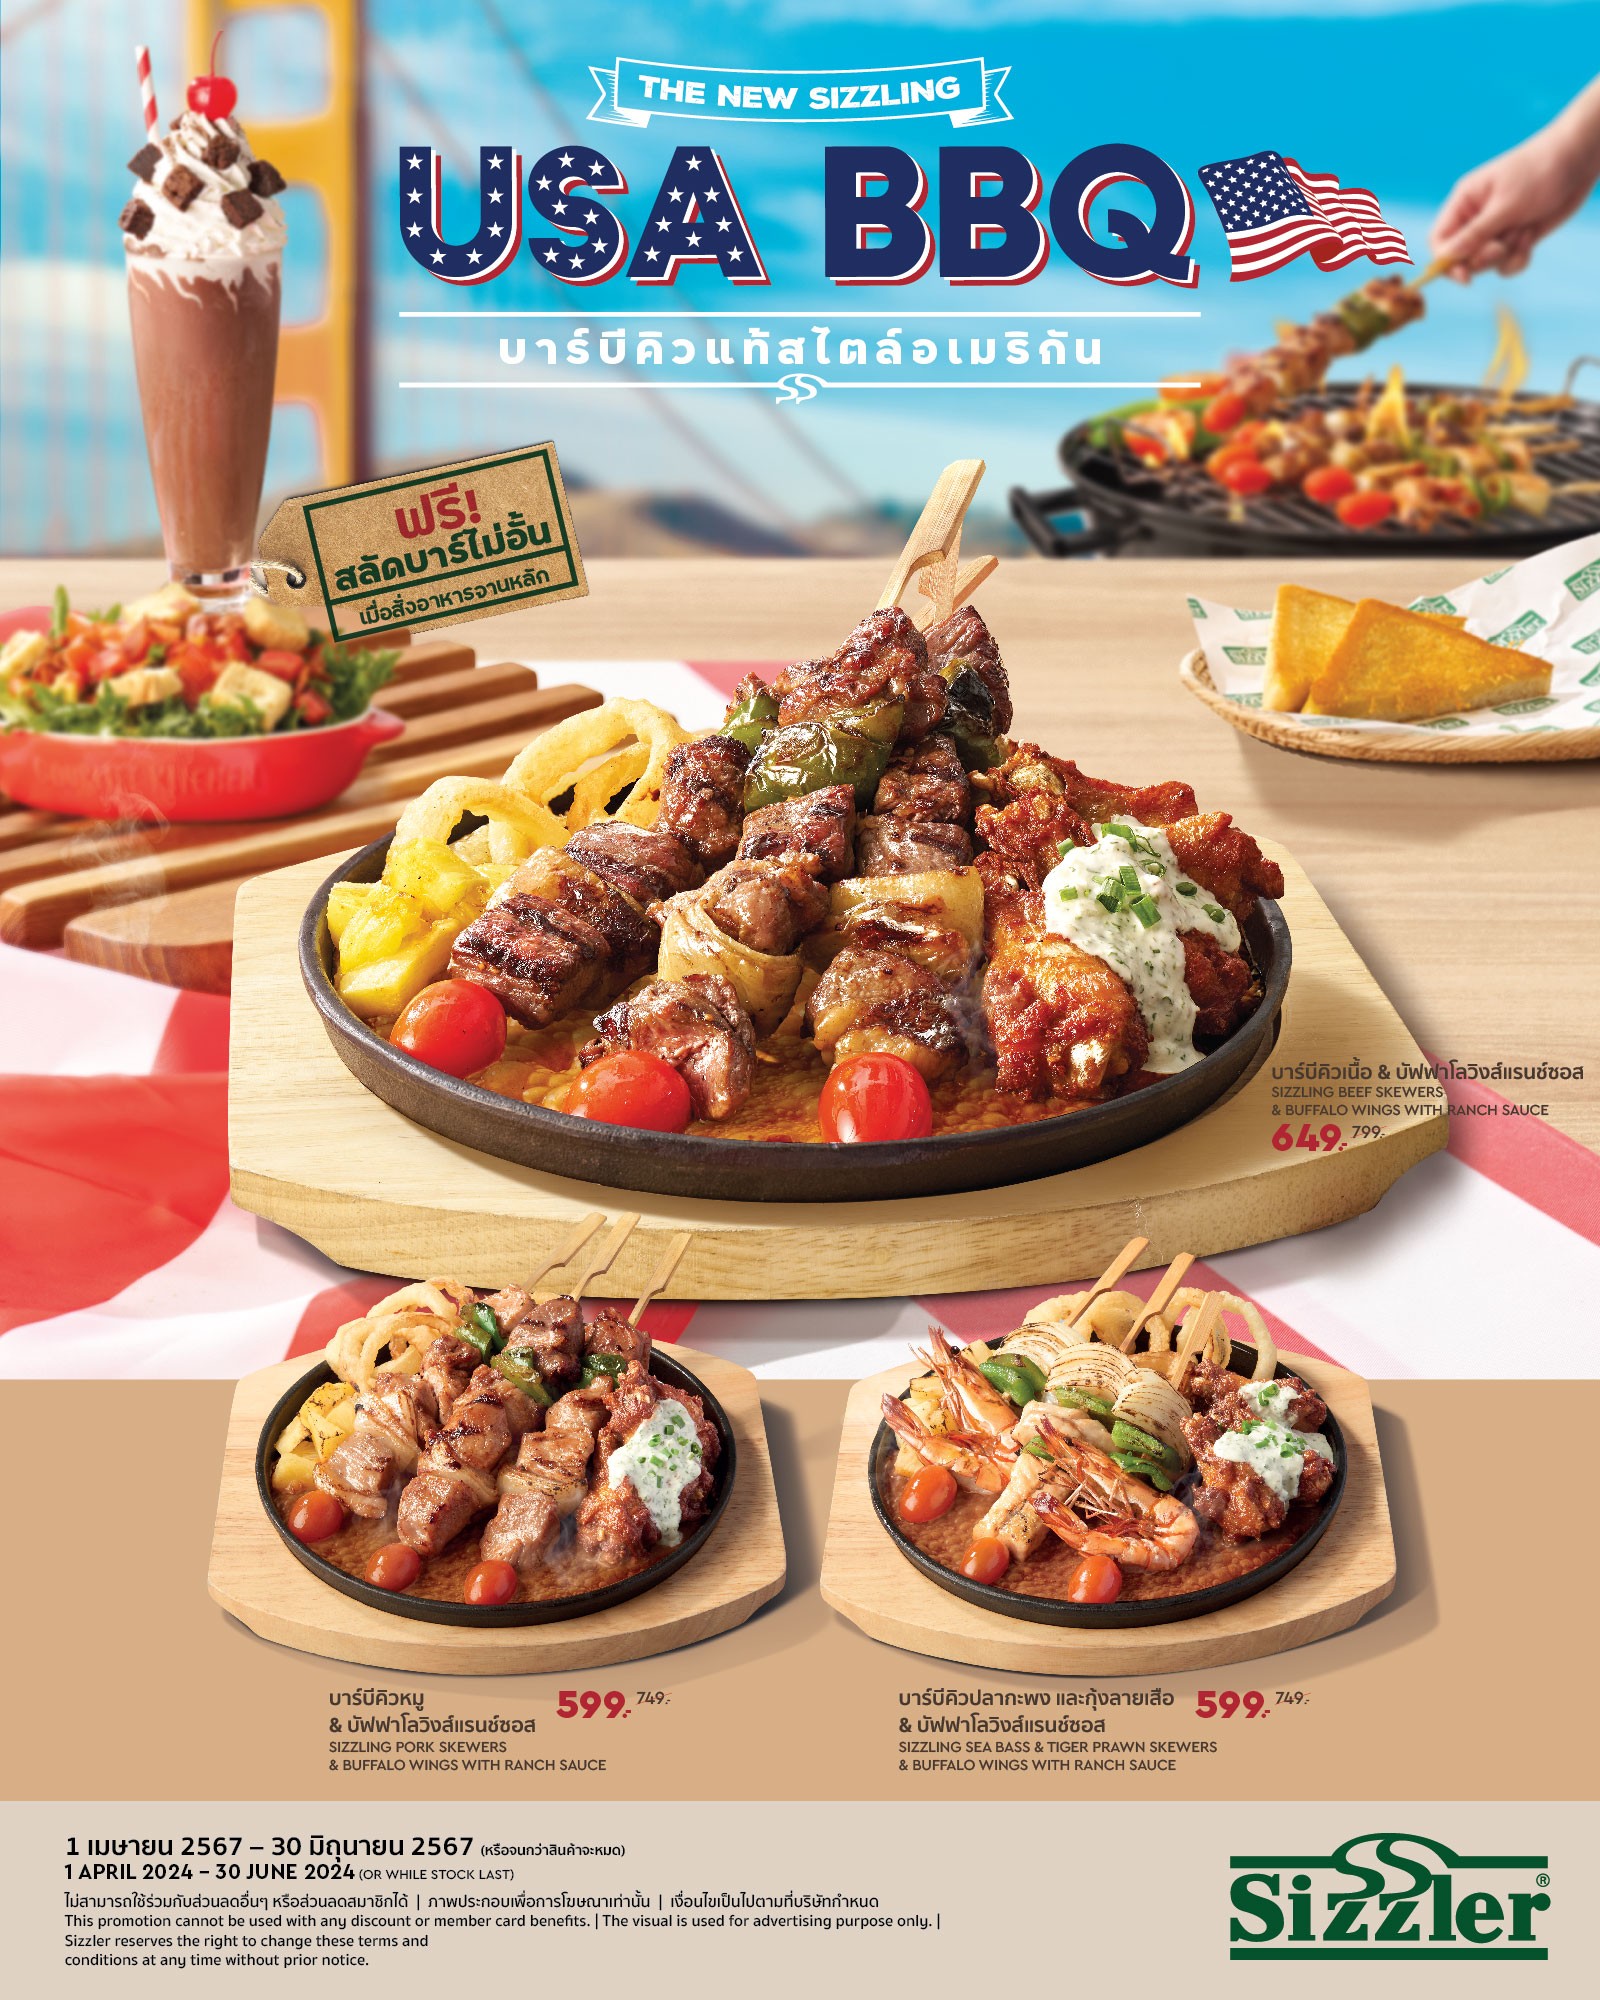 The New Sizzling USA BBQ